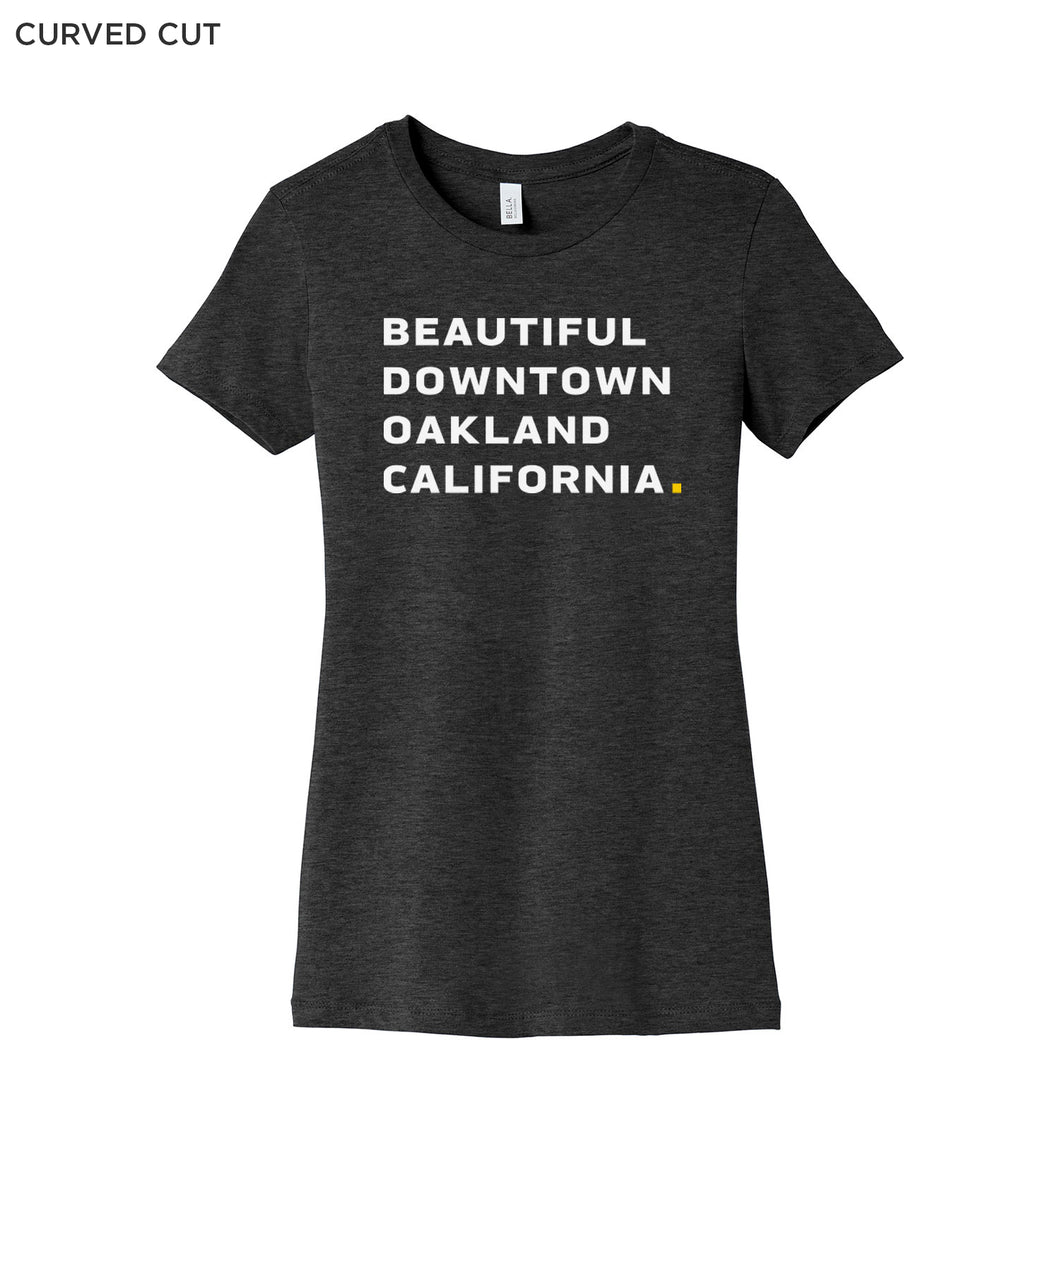 Heather black curved cut t-shirt with white words "Beautiful Downtown Oakland California" on the center chest - by 99% Invisible